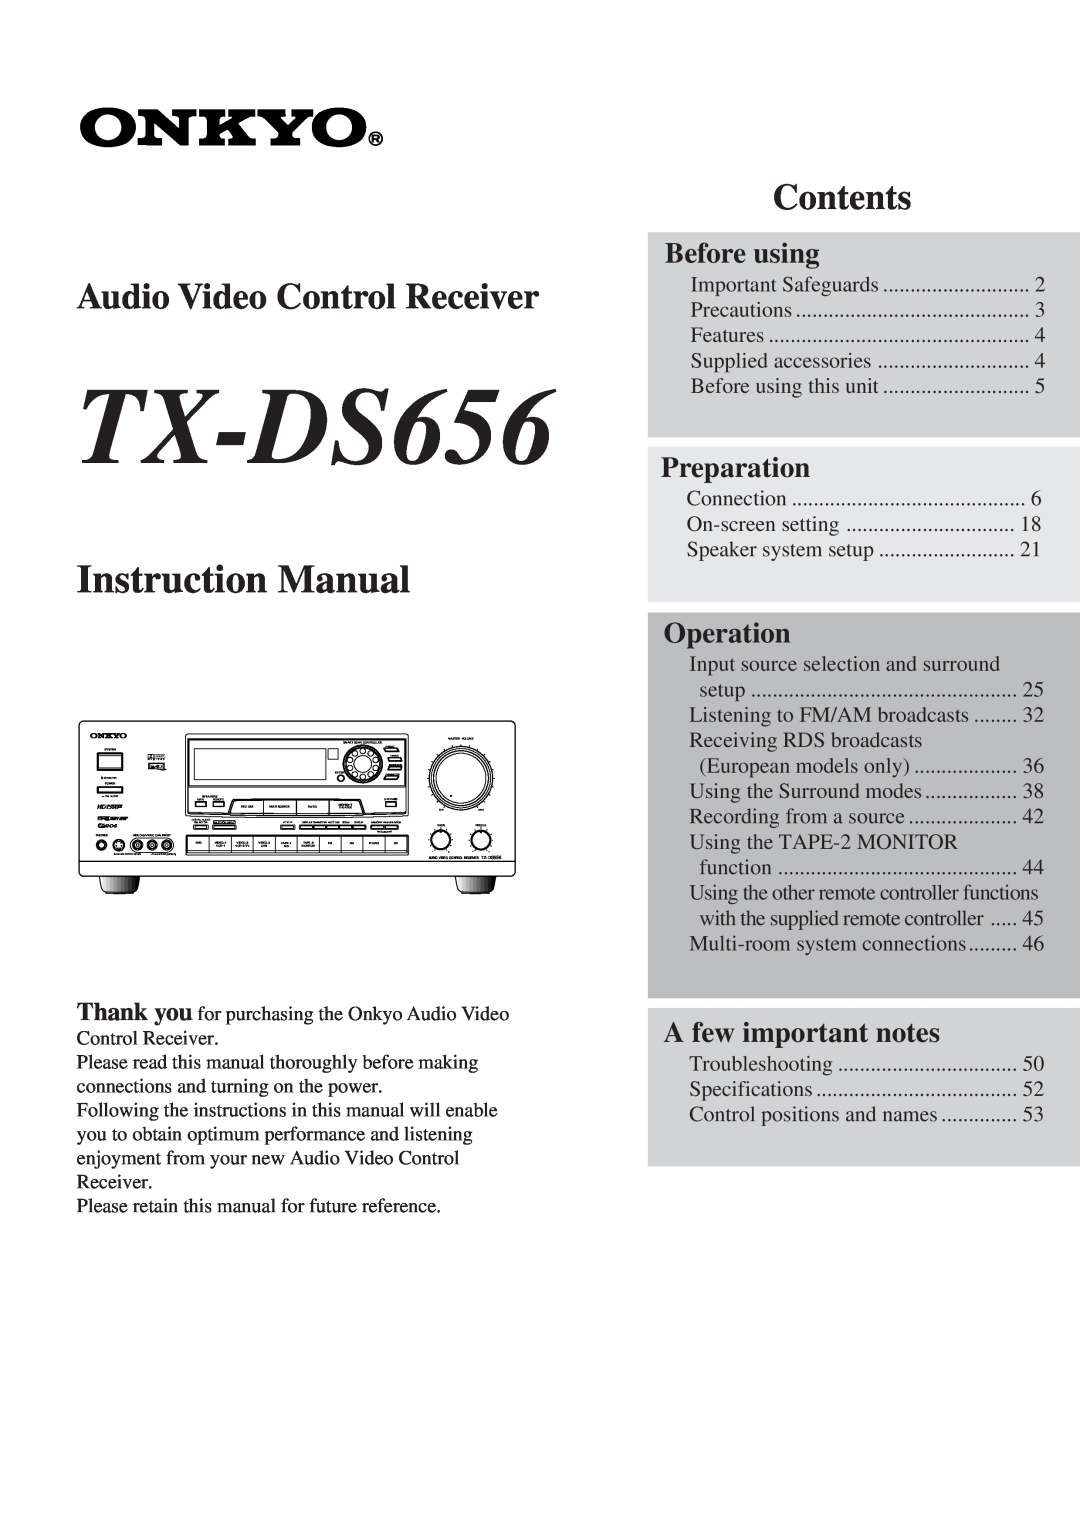 Onkyo TX-DS656 instruction manual Audio Video Control Receiver, Contents, Before using, Preparation, Operation 